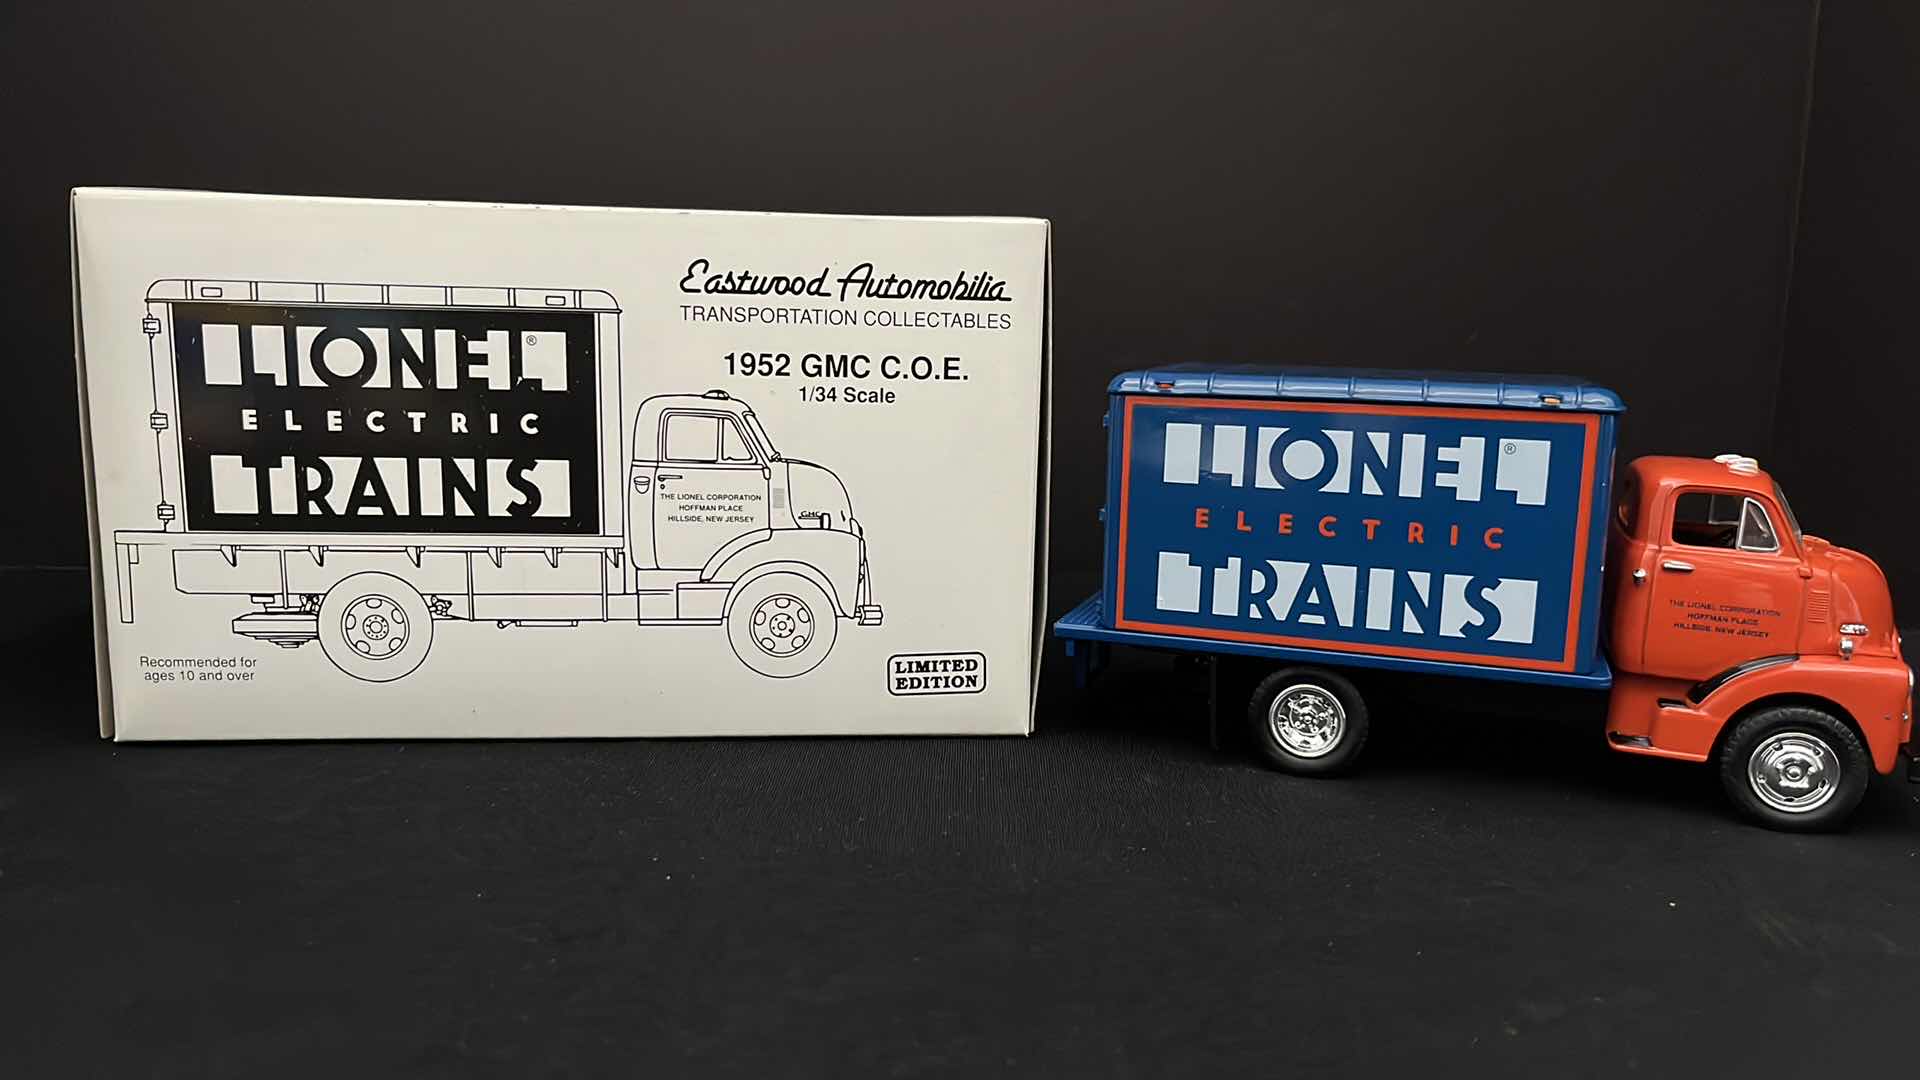 Photo 6 of FIRST GEAR INC, EASTWOOD AUTOMOBILIA TRANSPORTATION COLLECTIBLES LIONEL ELECTRIC TRAINS 1952 GMC C.O.E. NO 19-0108